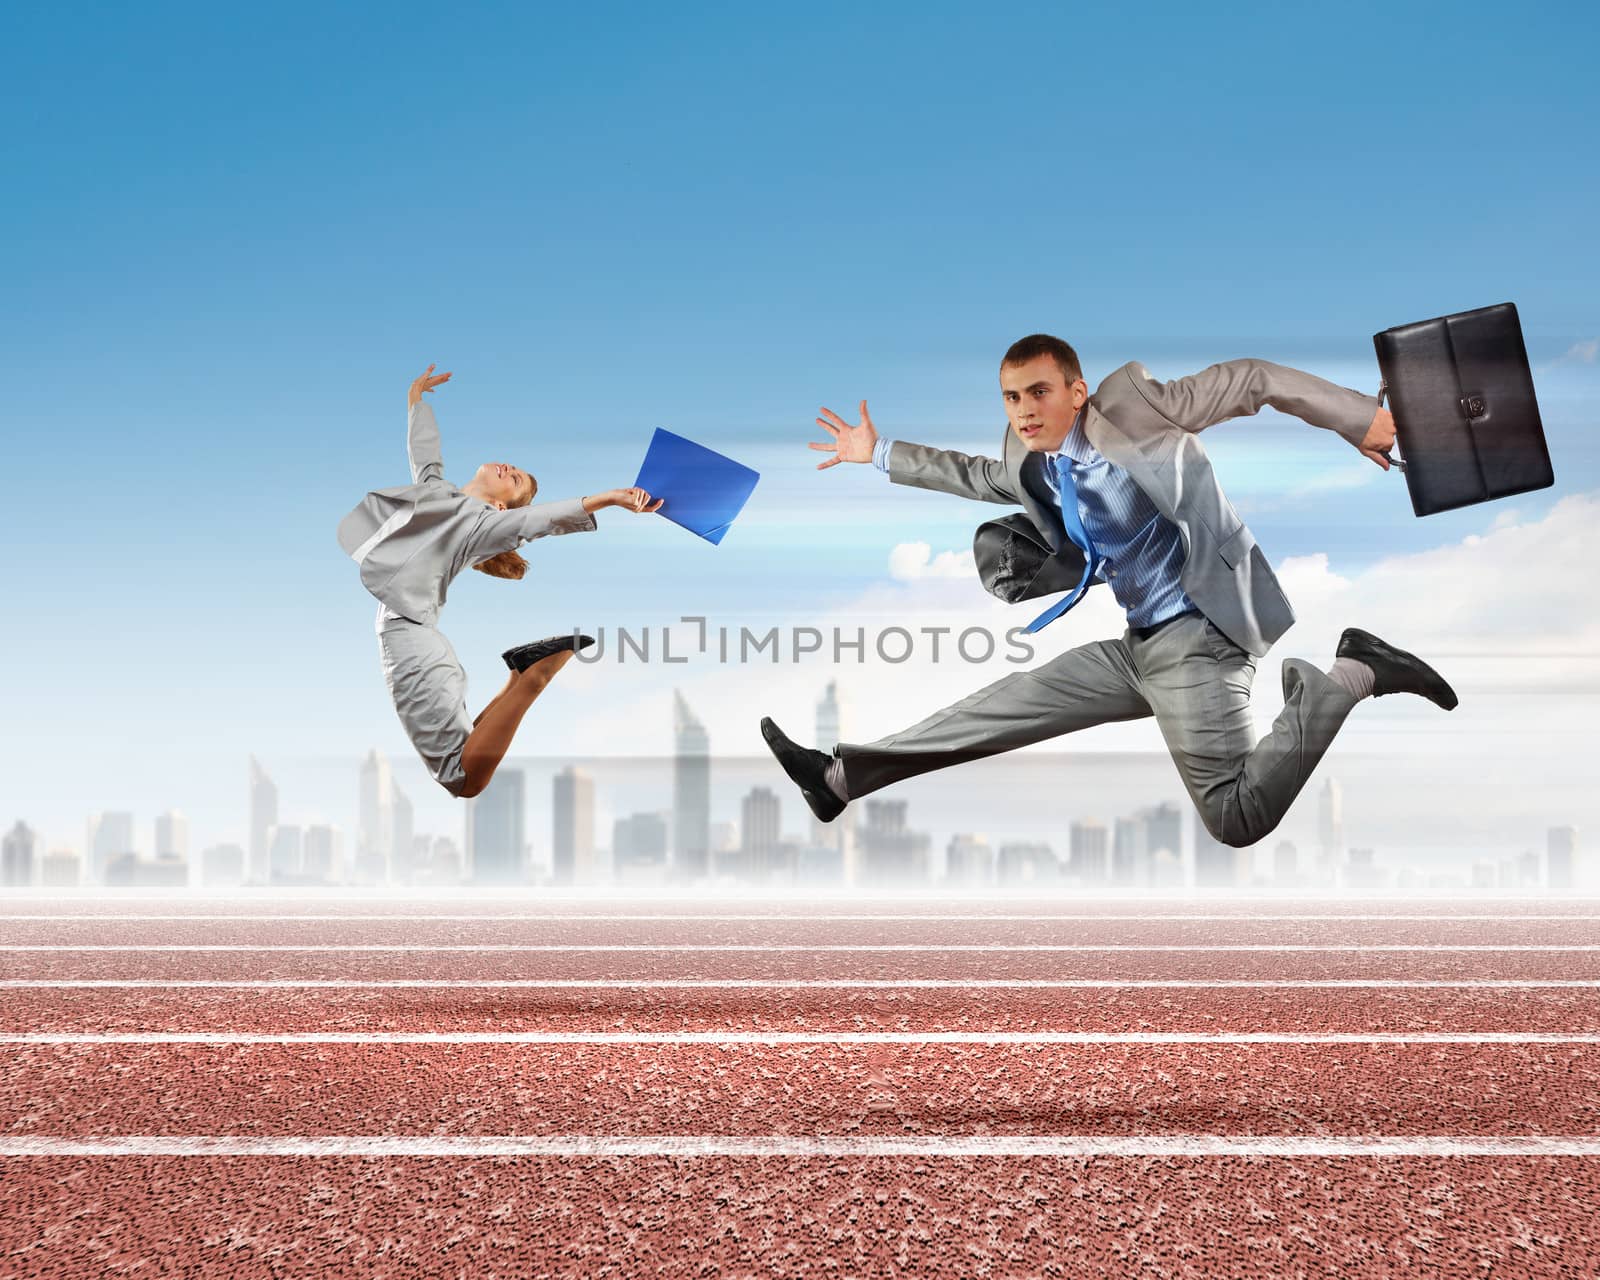 Image of business people running on tracks. Competition concept